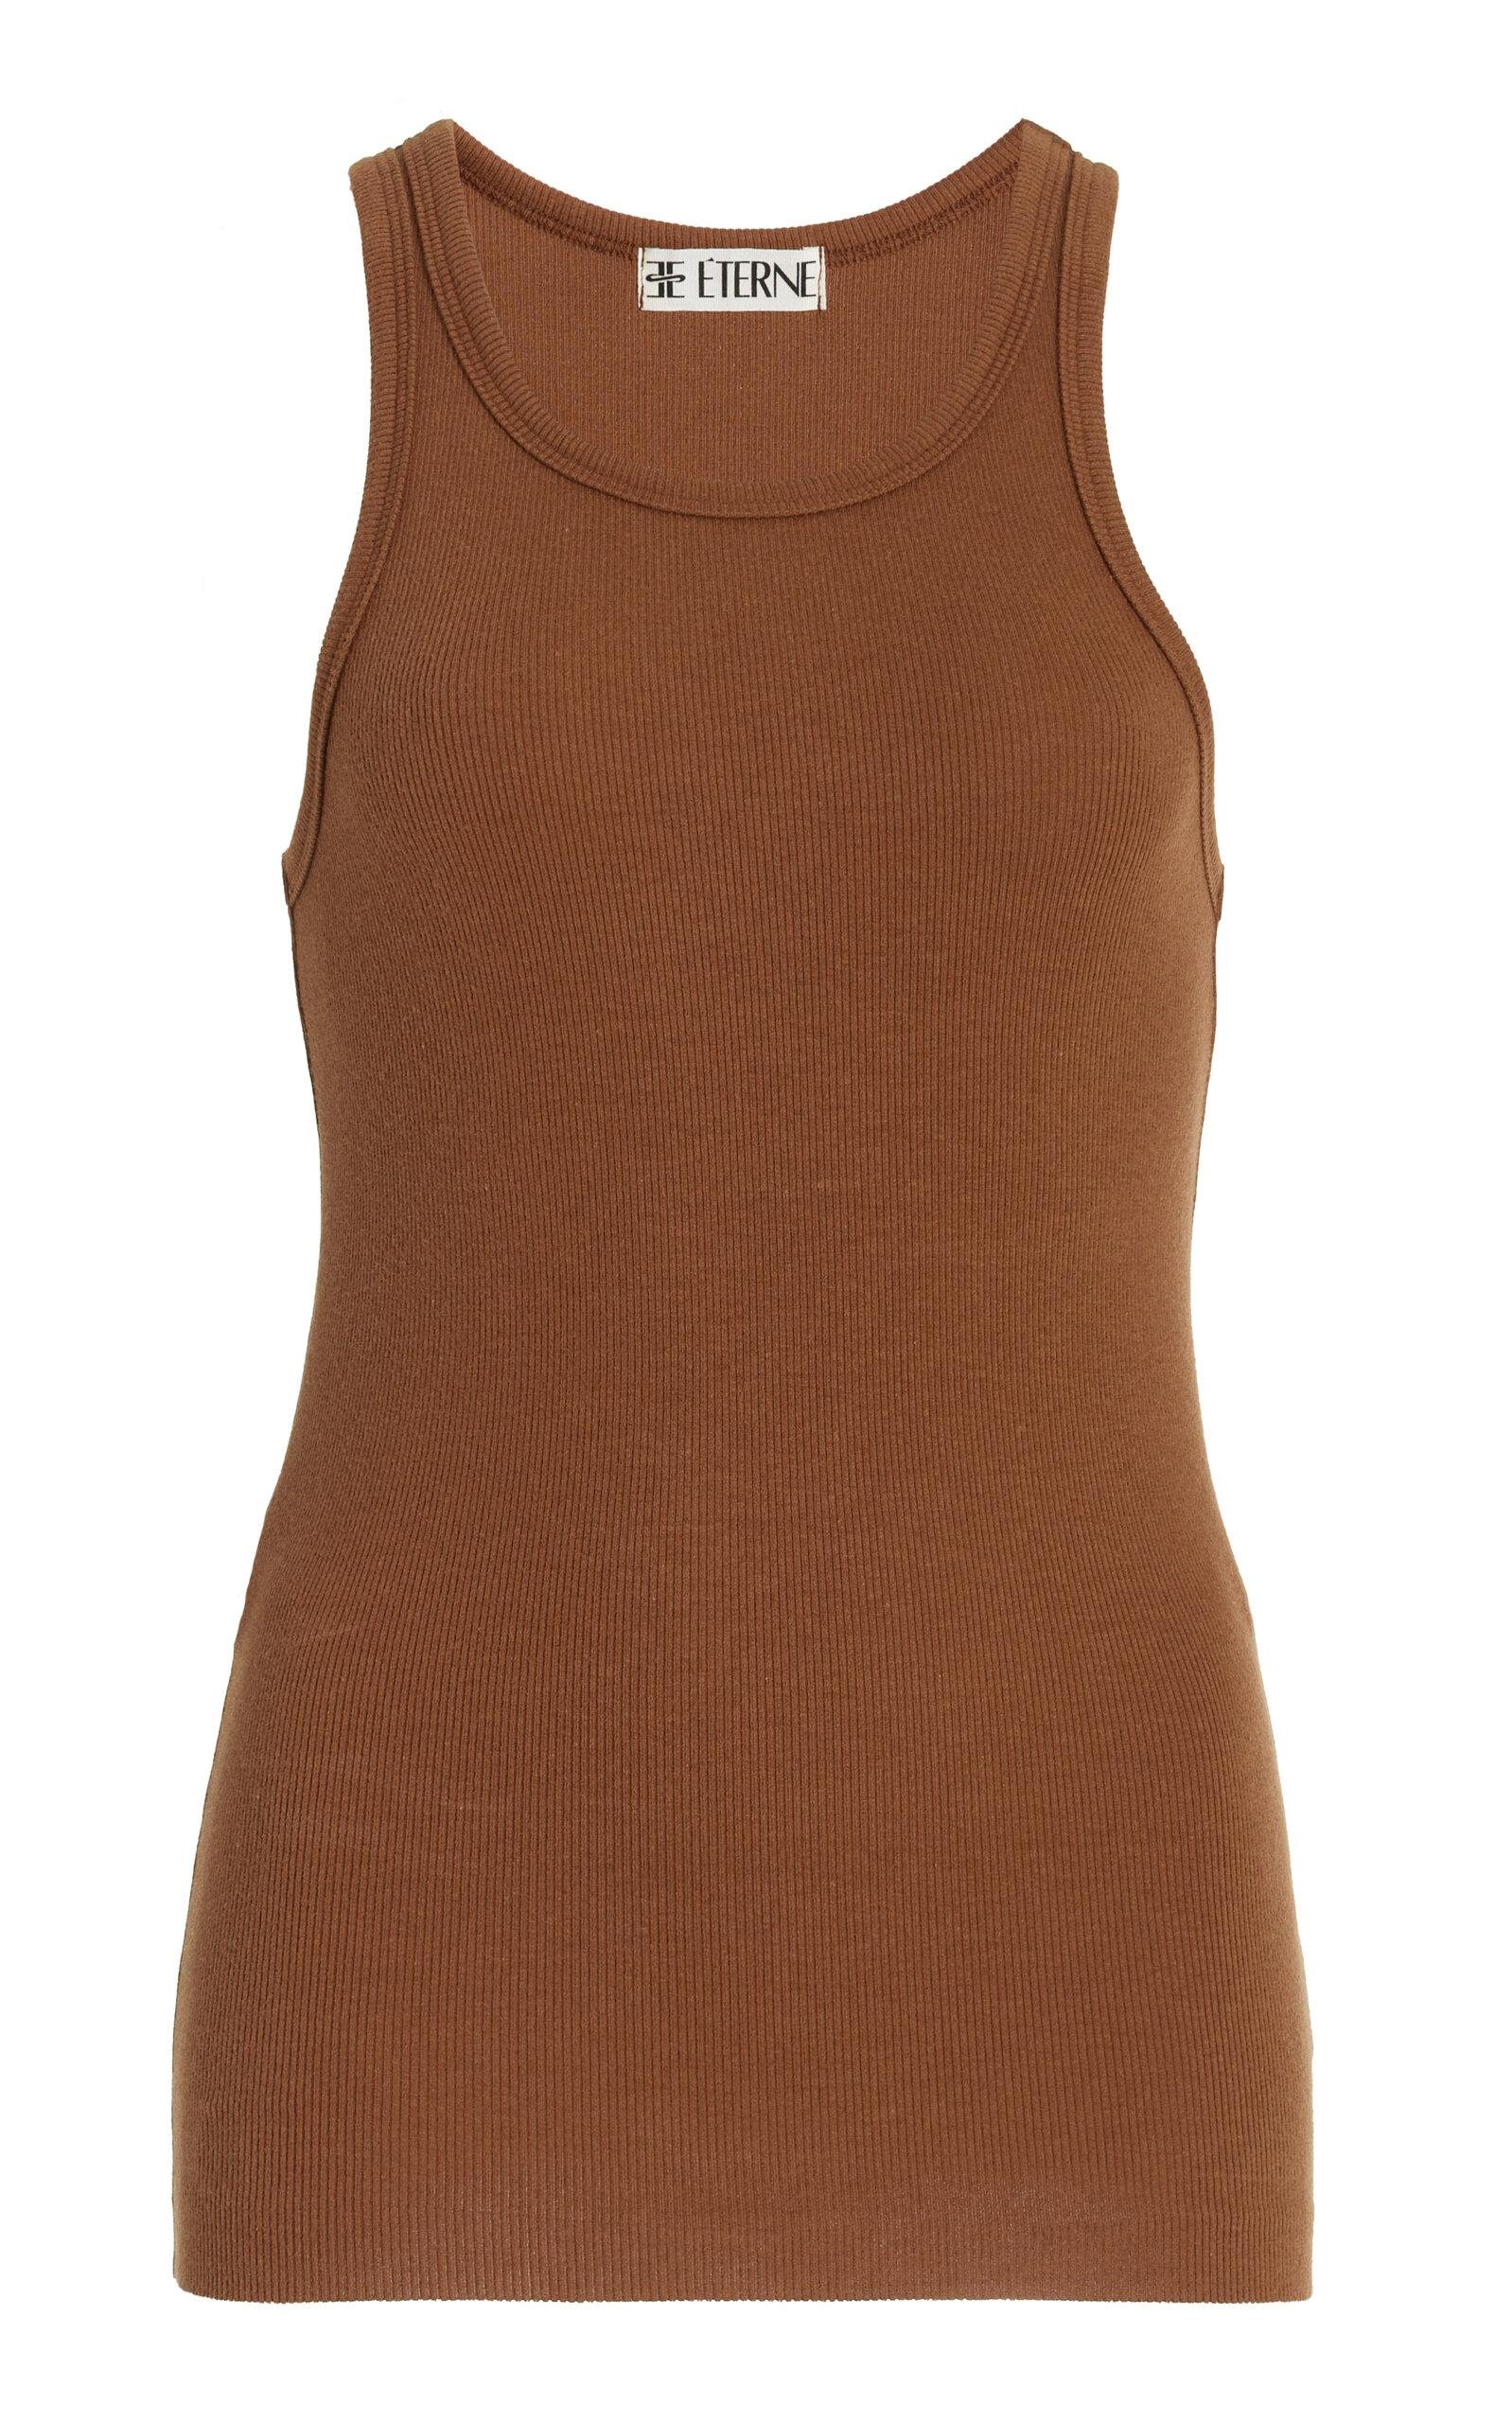 Éterne - High-Neck Fitted Jersey Tank Top - Brown - M - Moda Operandi by ETERNE